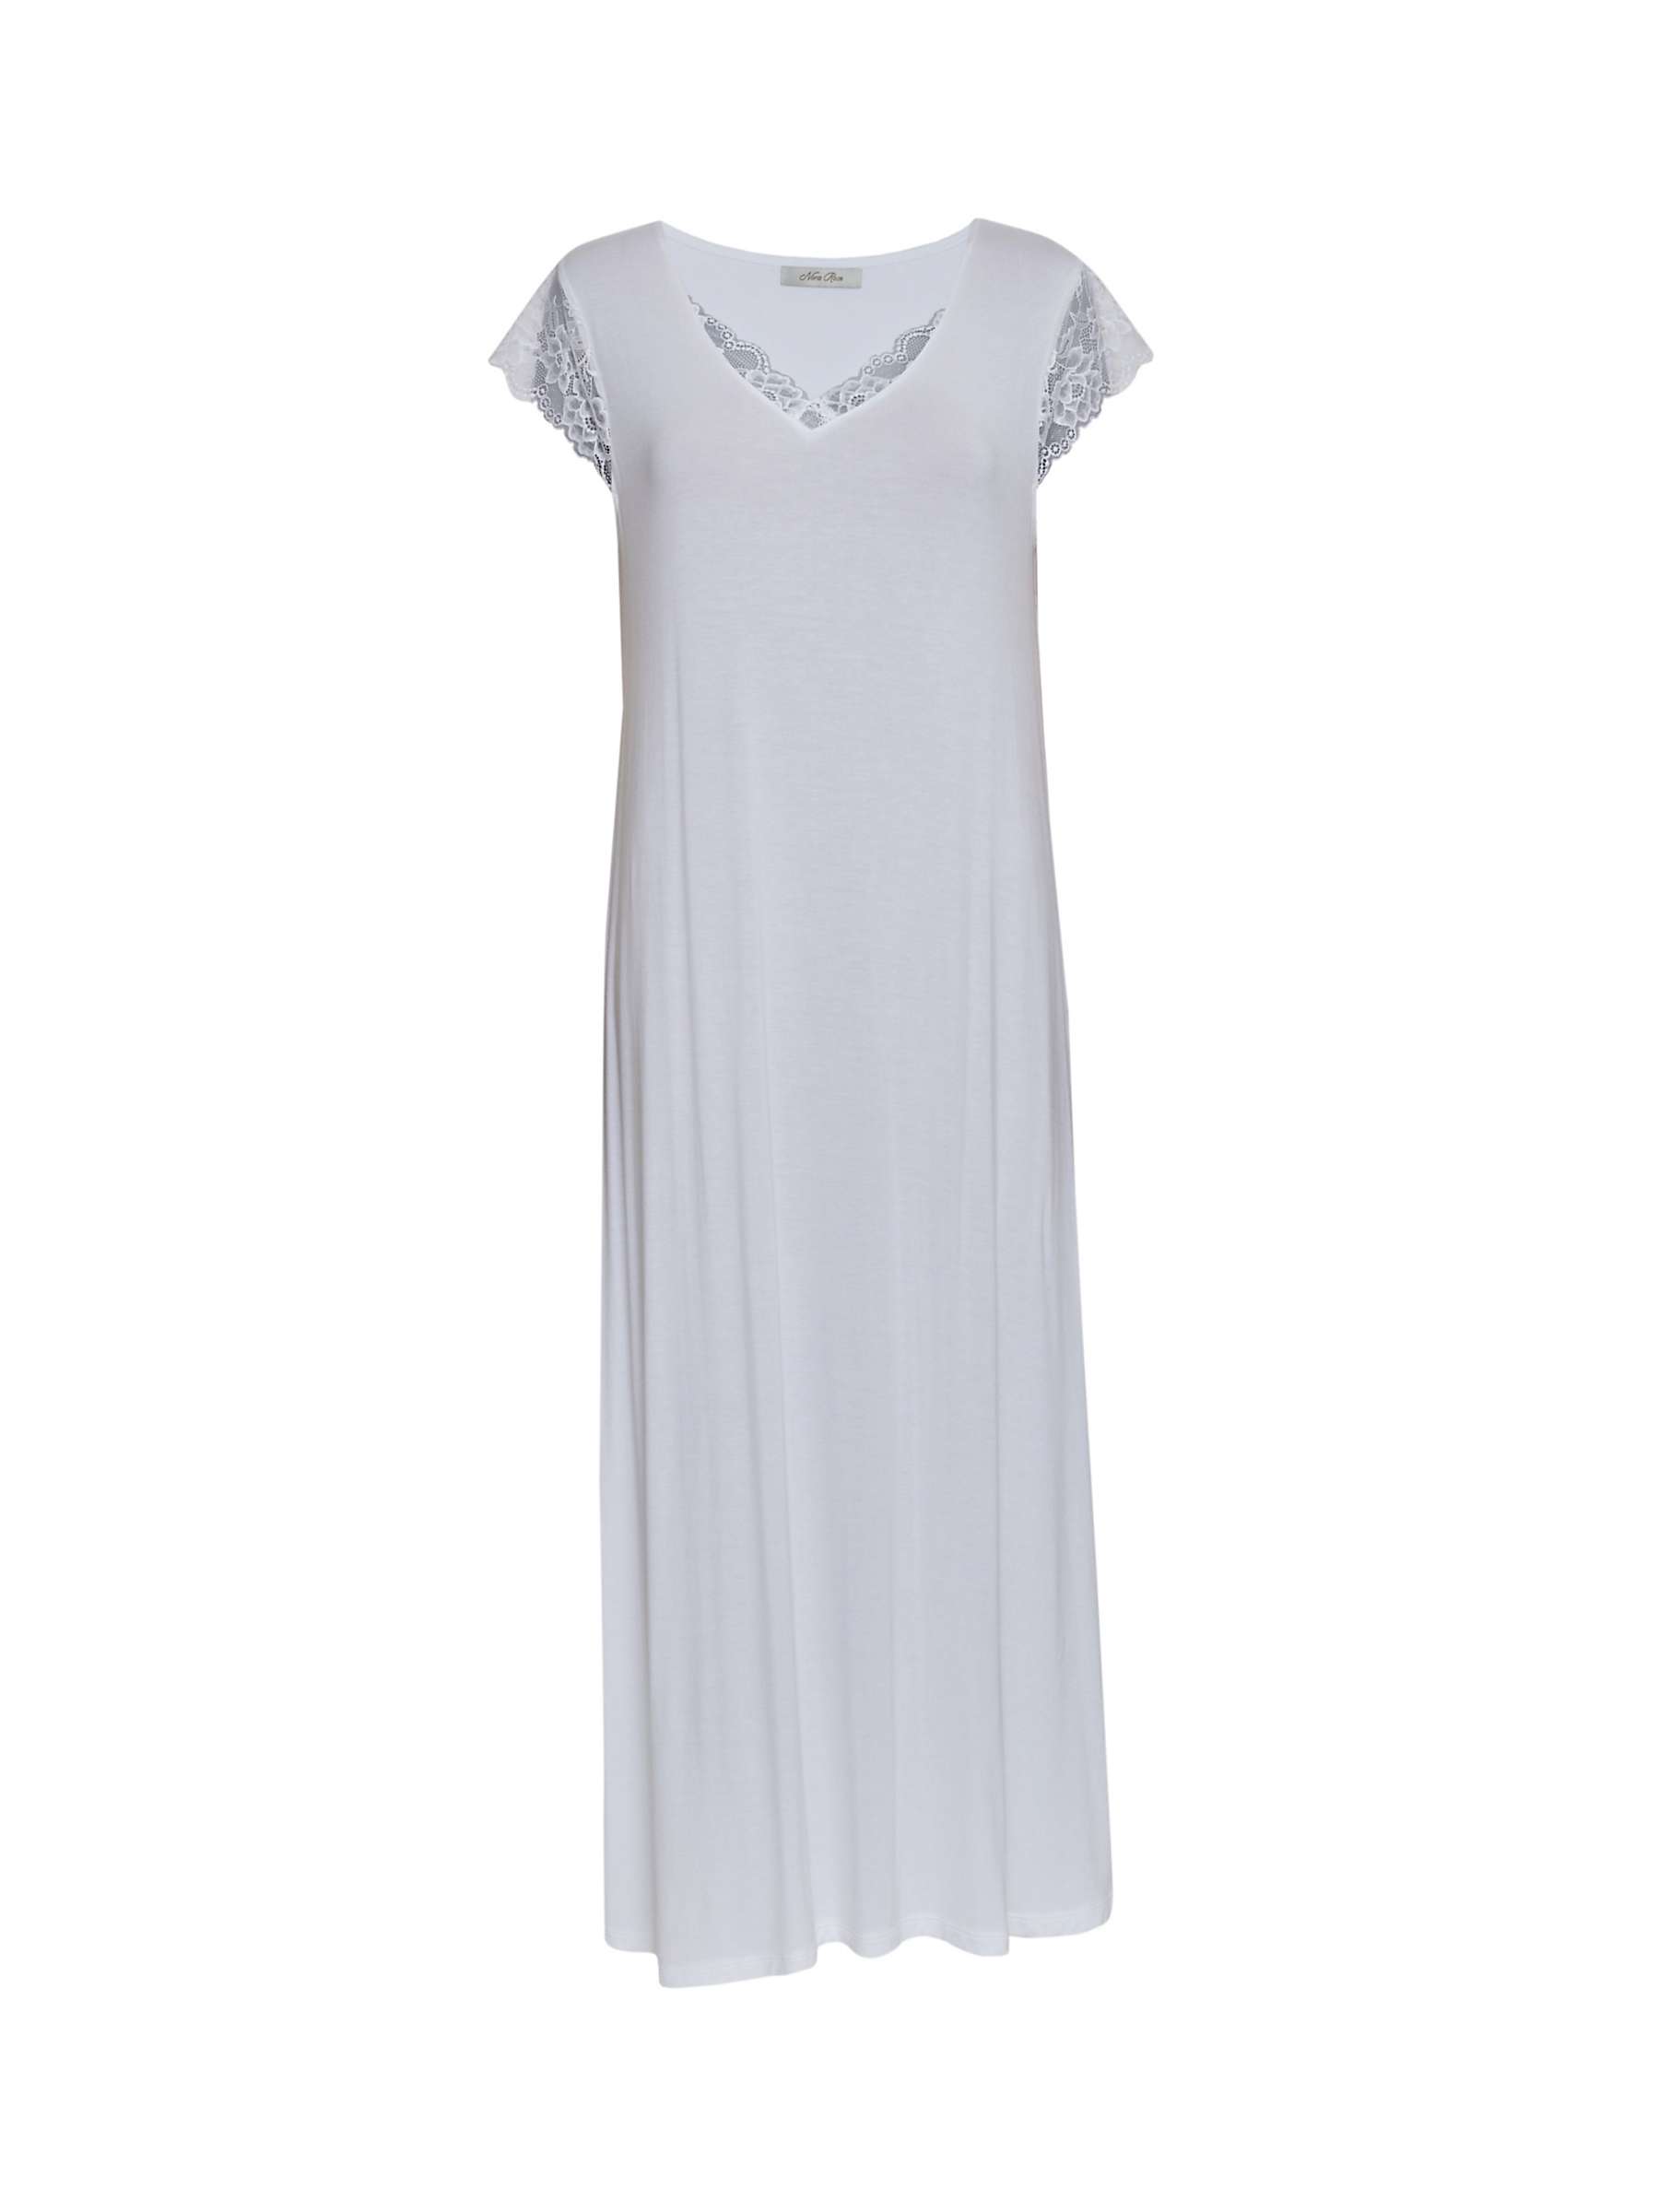 Buy Cyberjammies Tessa Jersey Lace Detail Maxi Nightdress, White Online at johnlewis.com